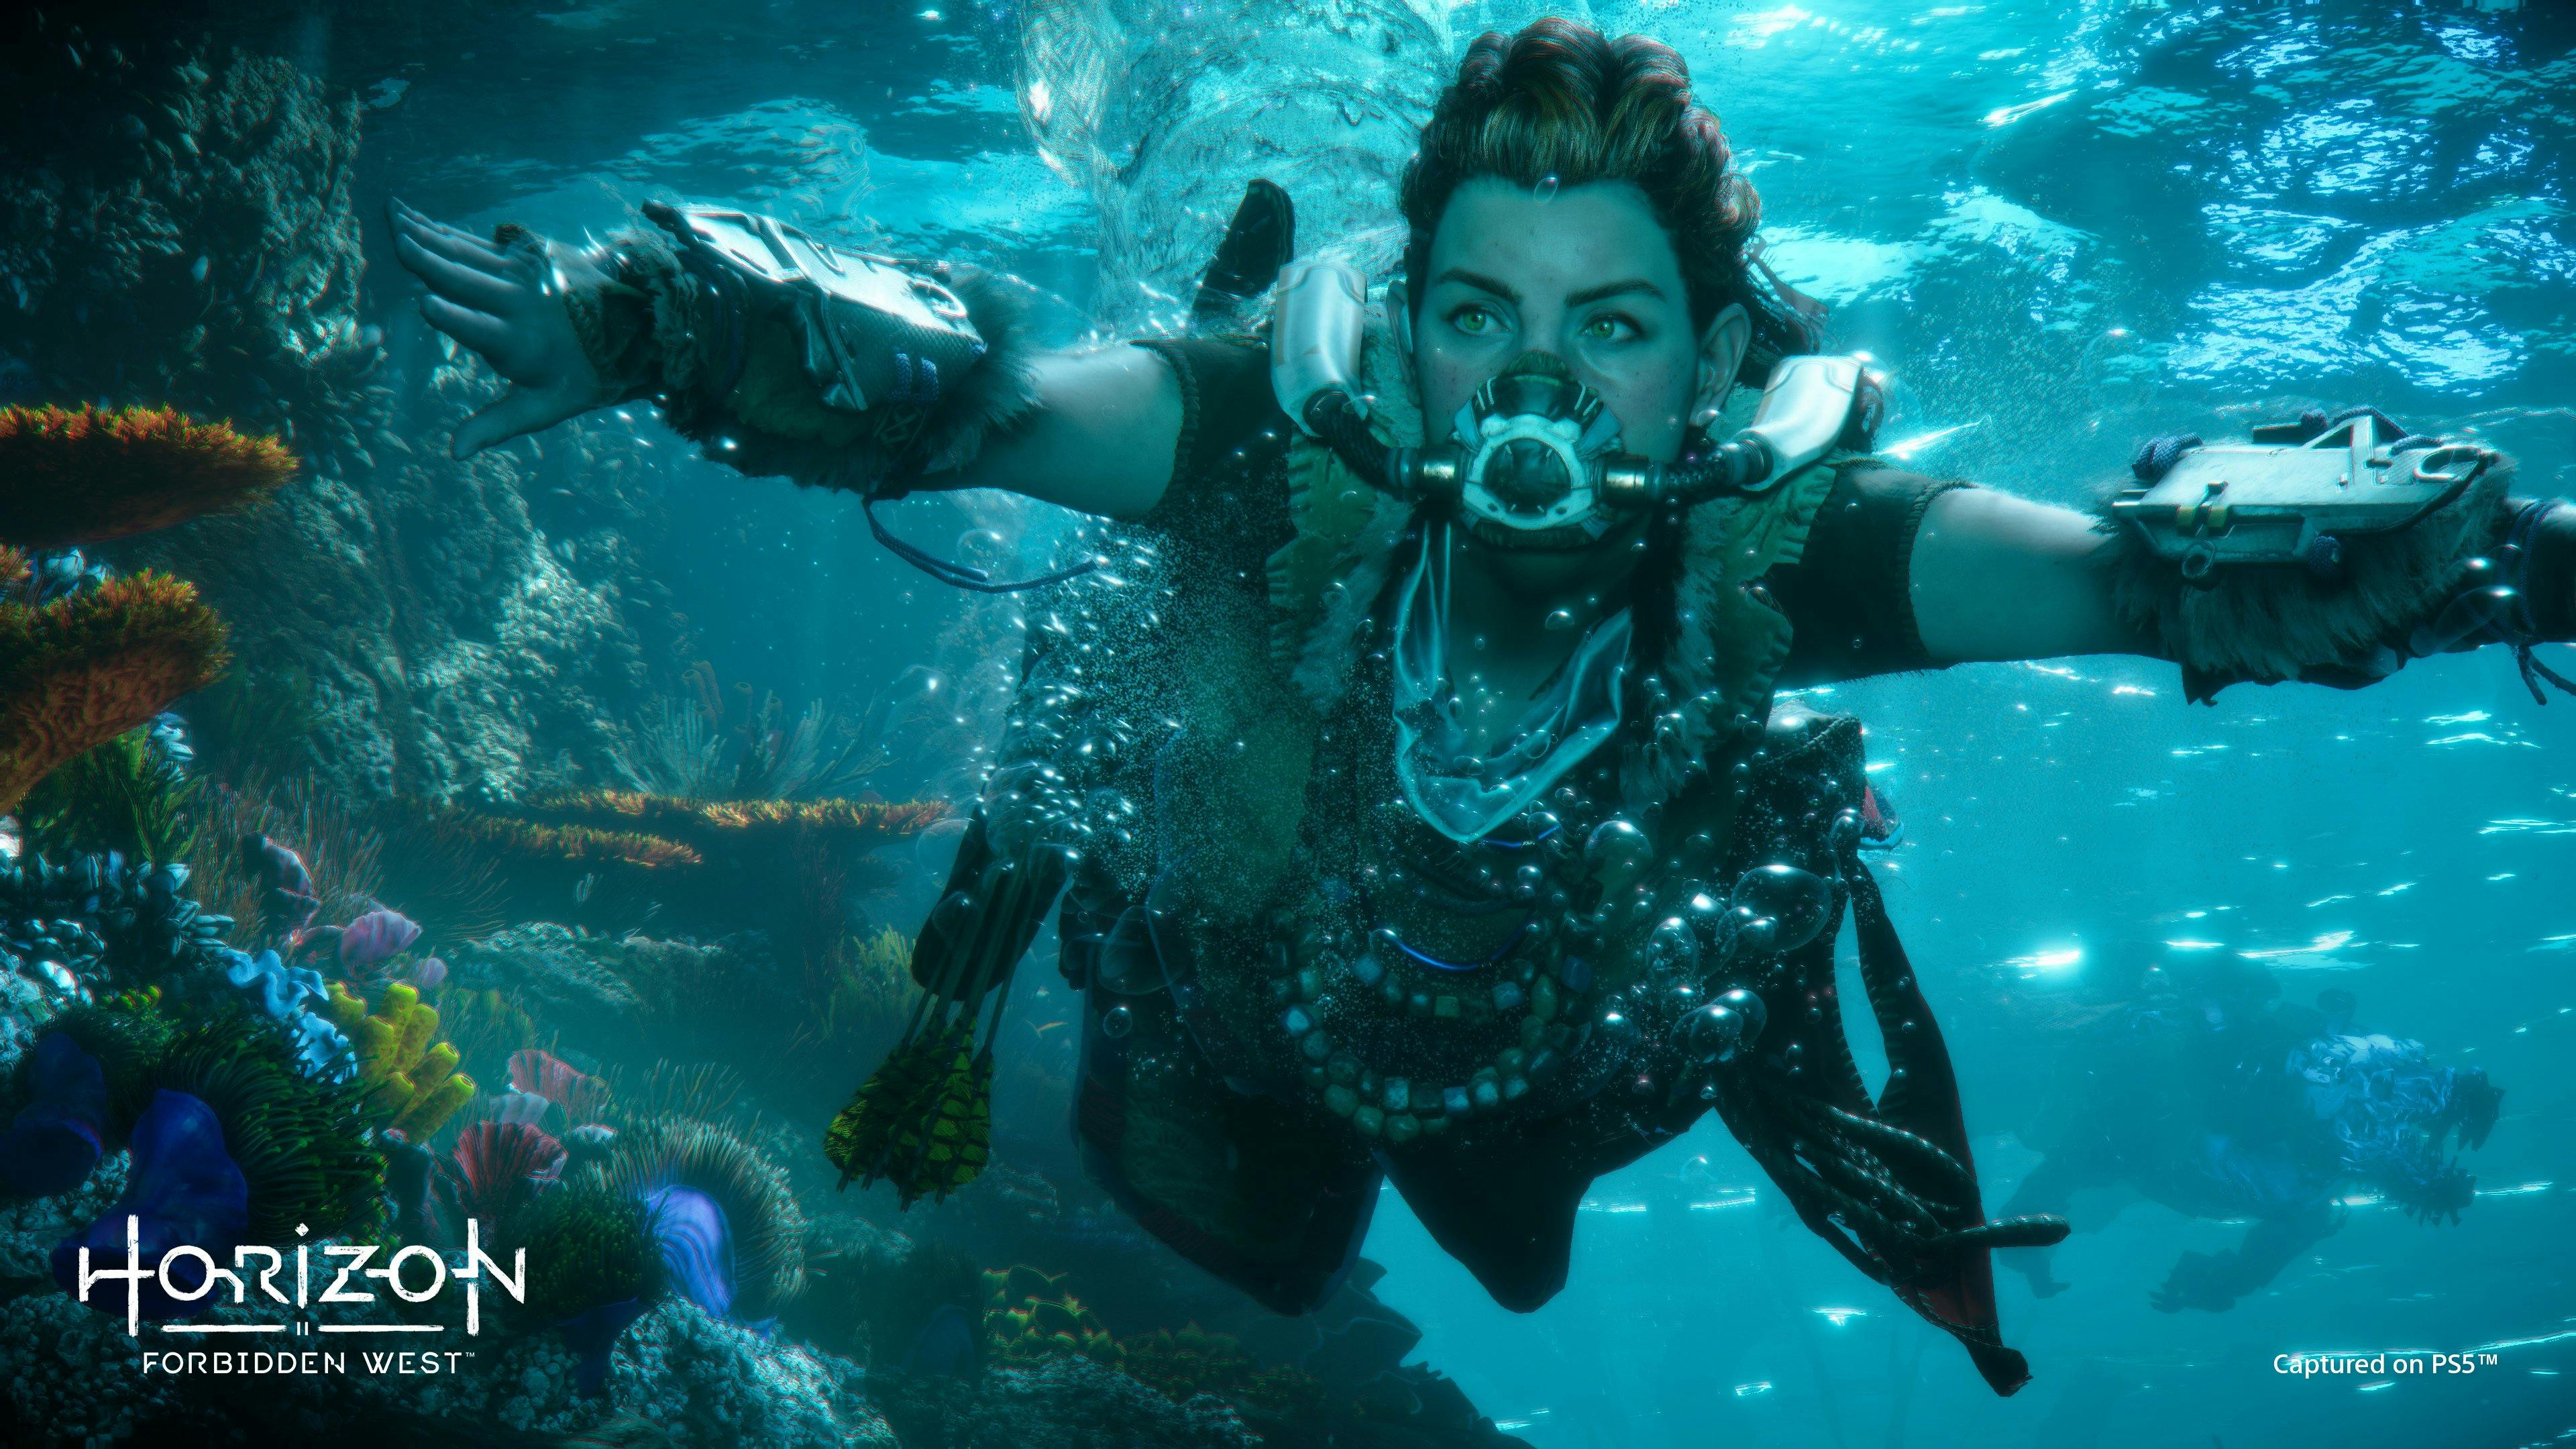 Closeup of Aloy swimming in the water.